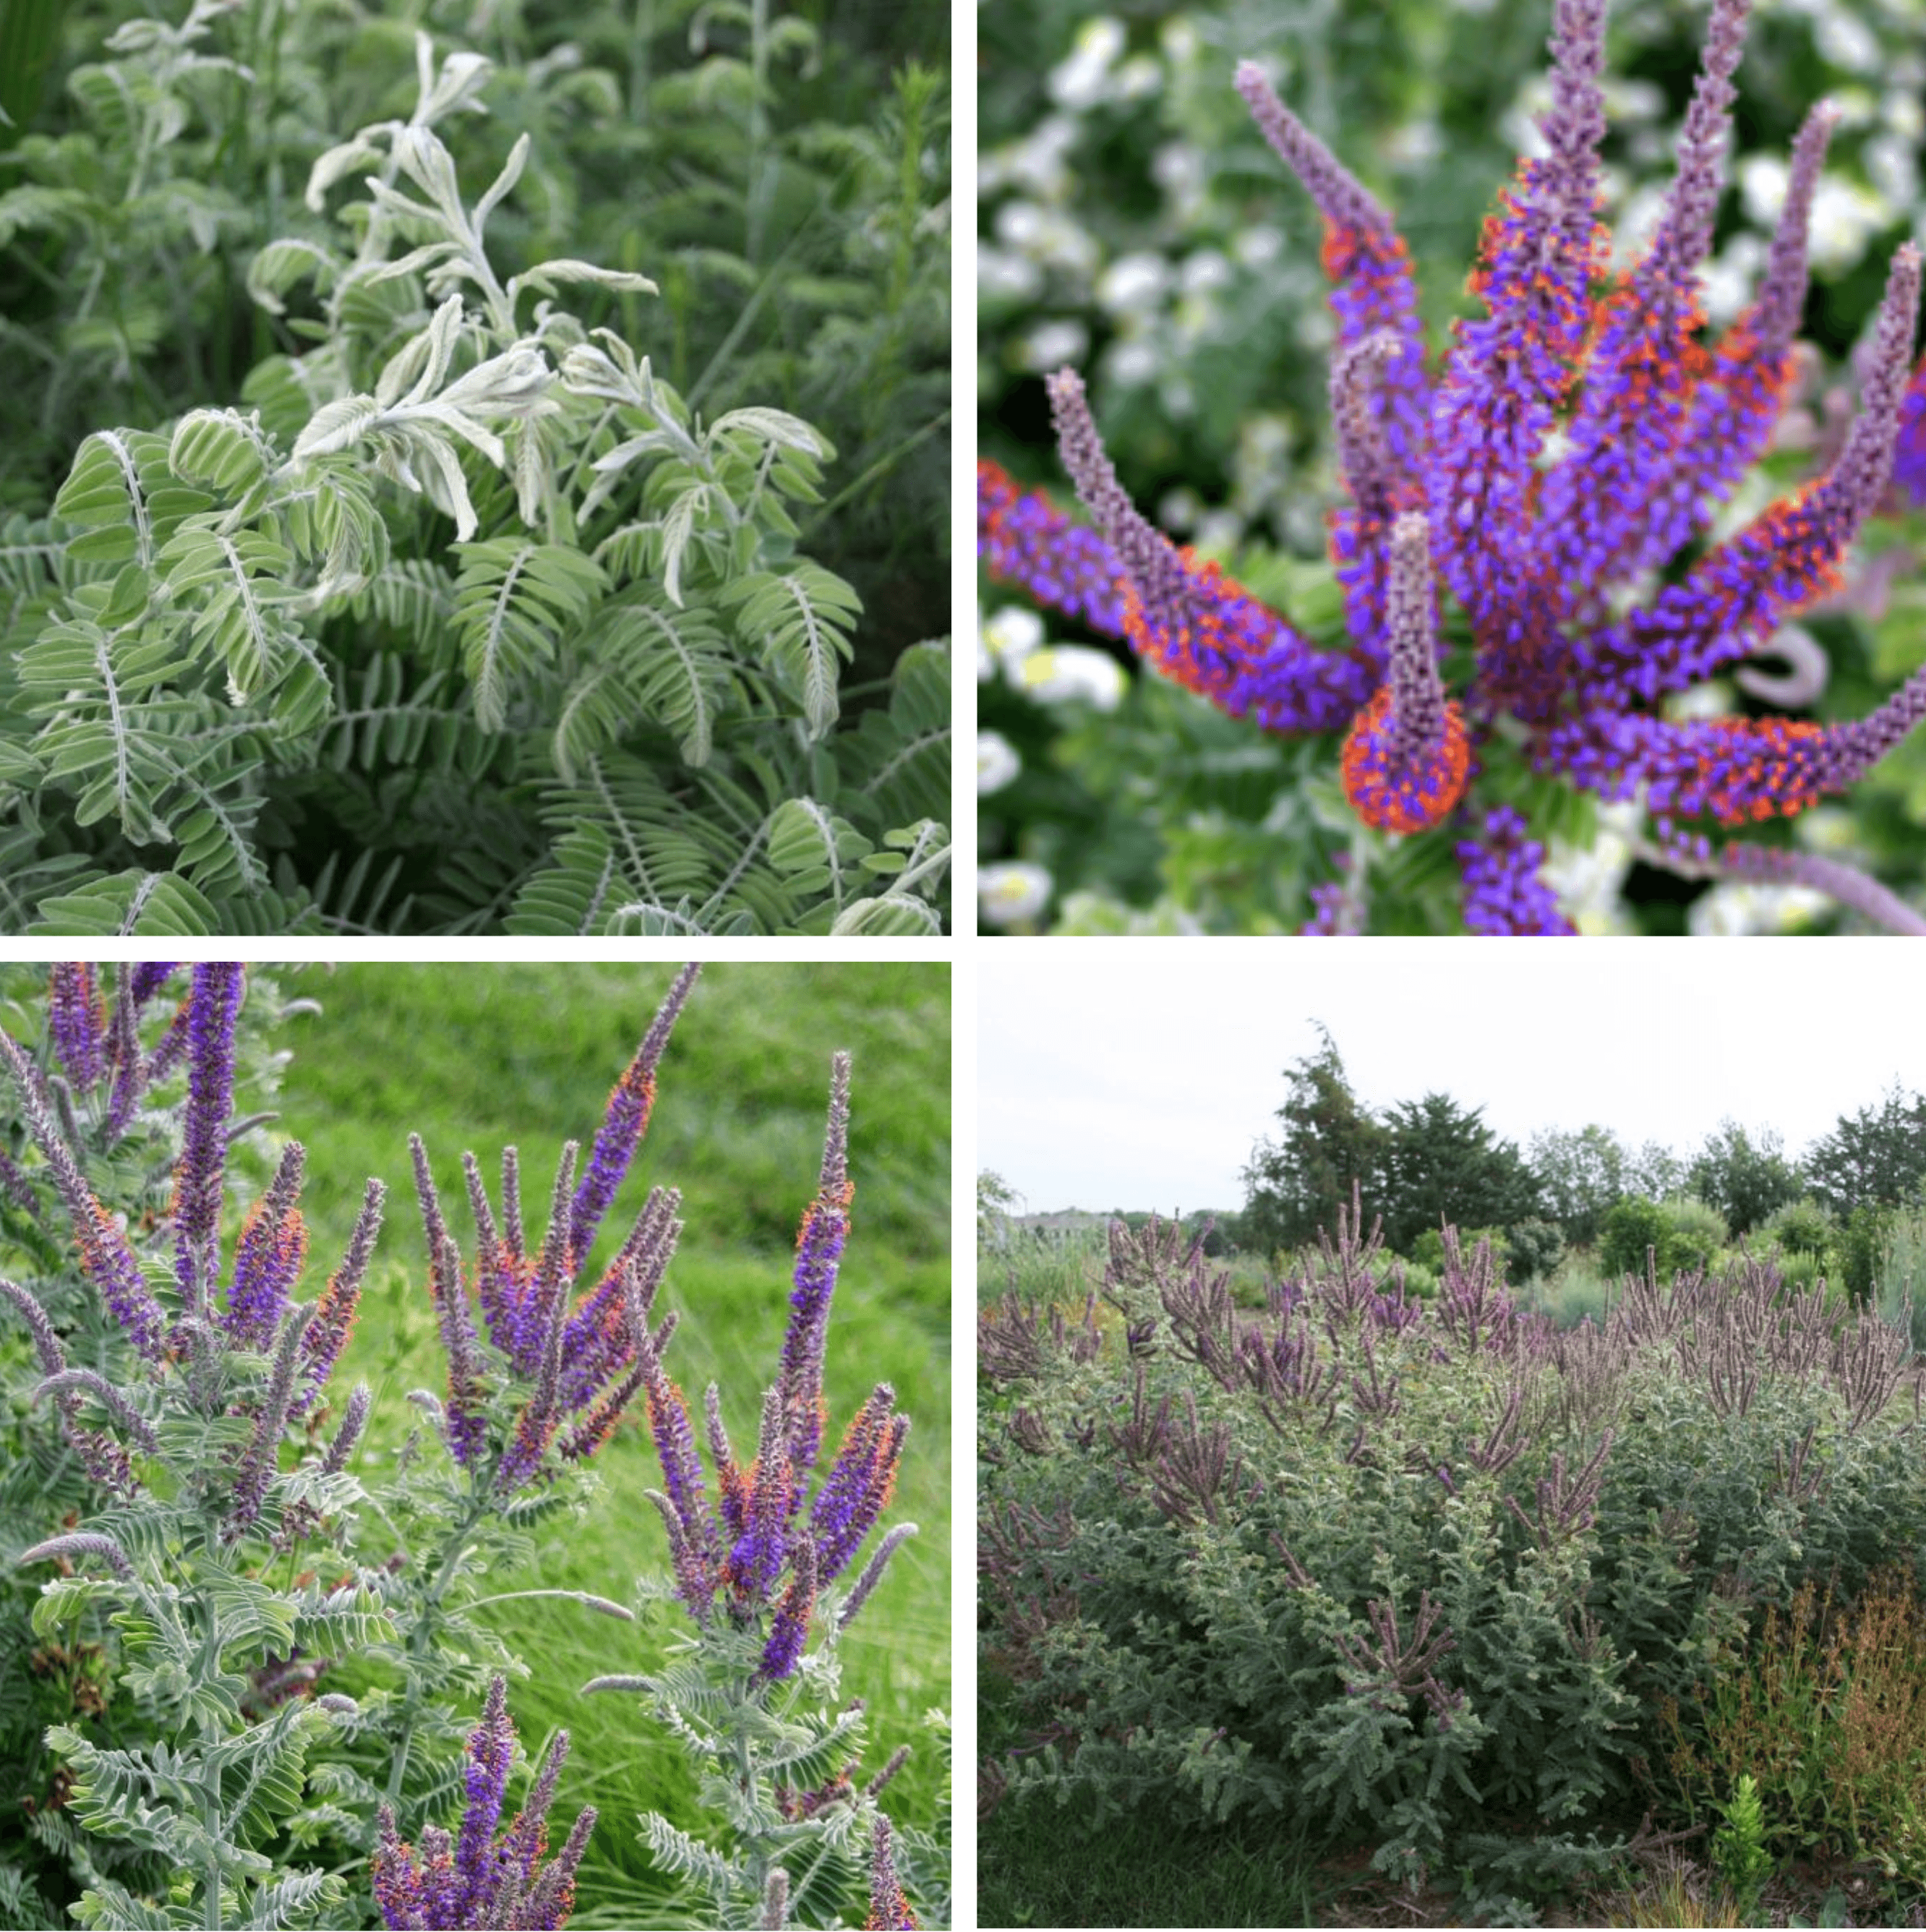 Amorpha canescens or Leadplant has a funky flower and creates a neat texture in the garden. Plus the leaves are soft and a little fuzzy!